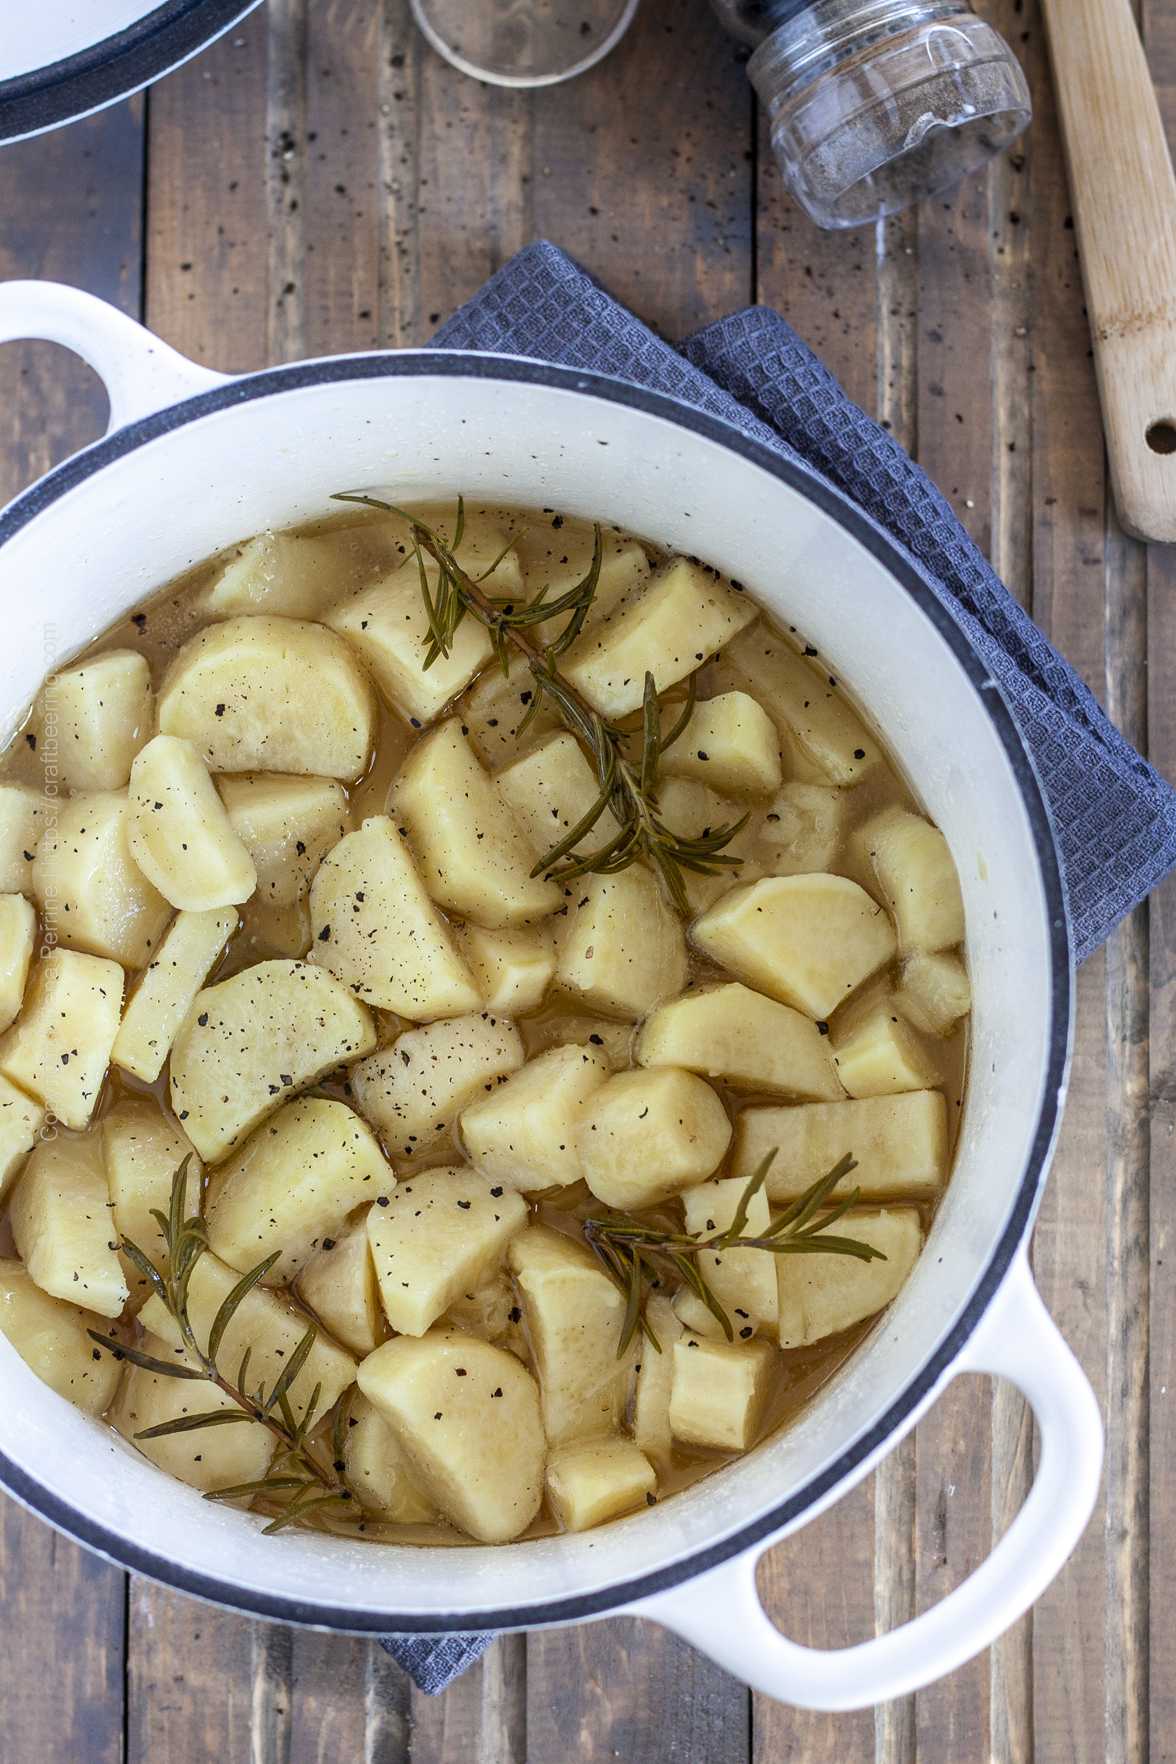 Braised sweet potatoes with pilsner and rosemary. (Hannah variety)